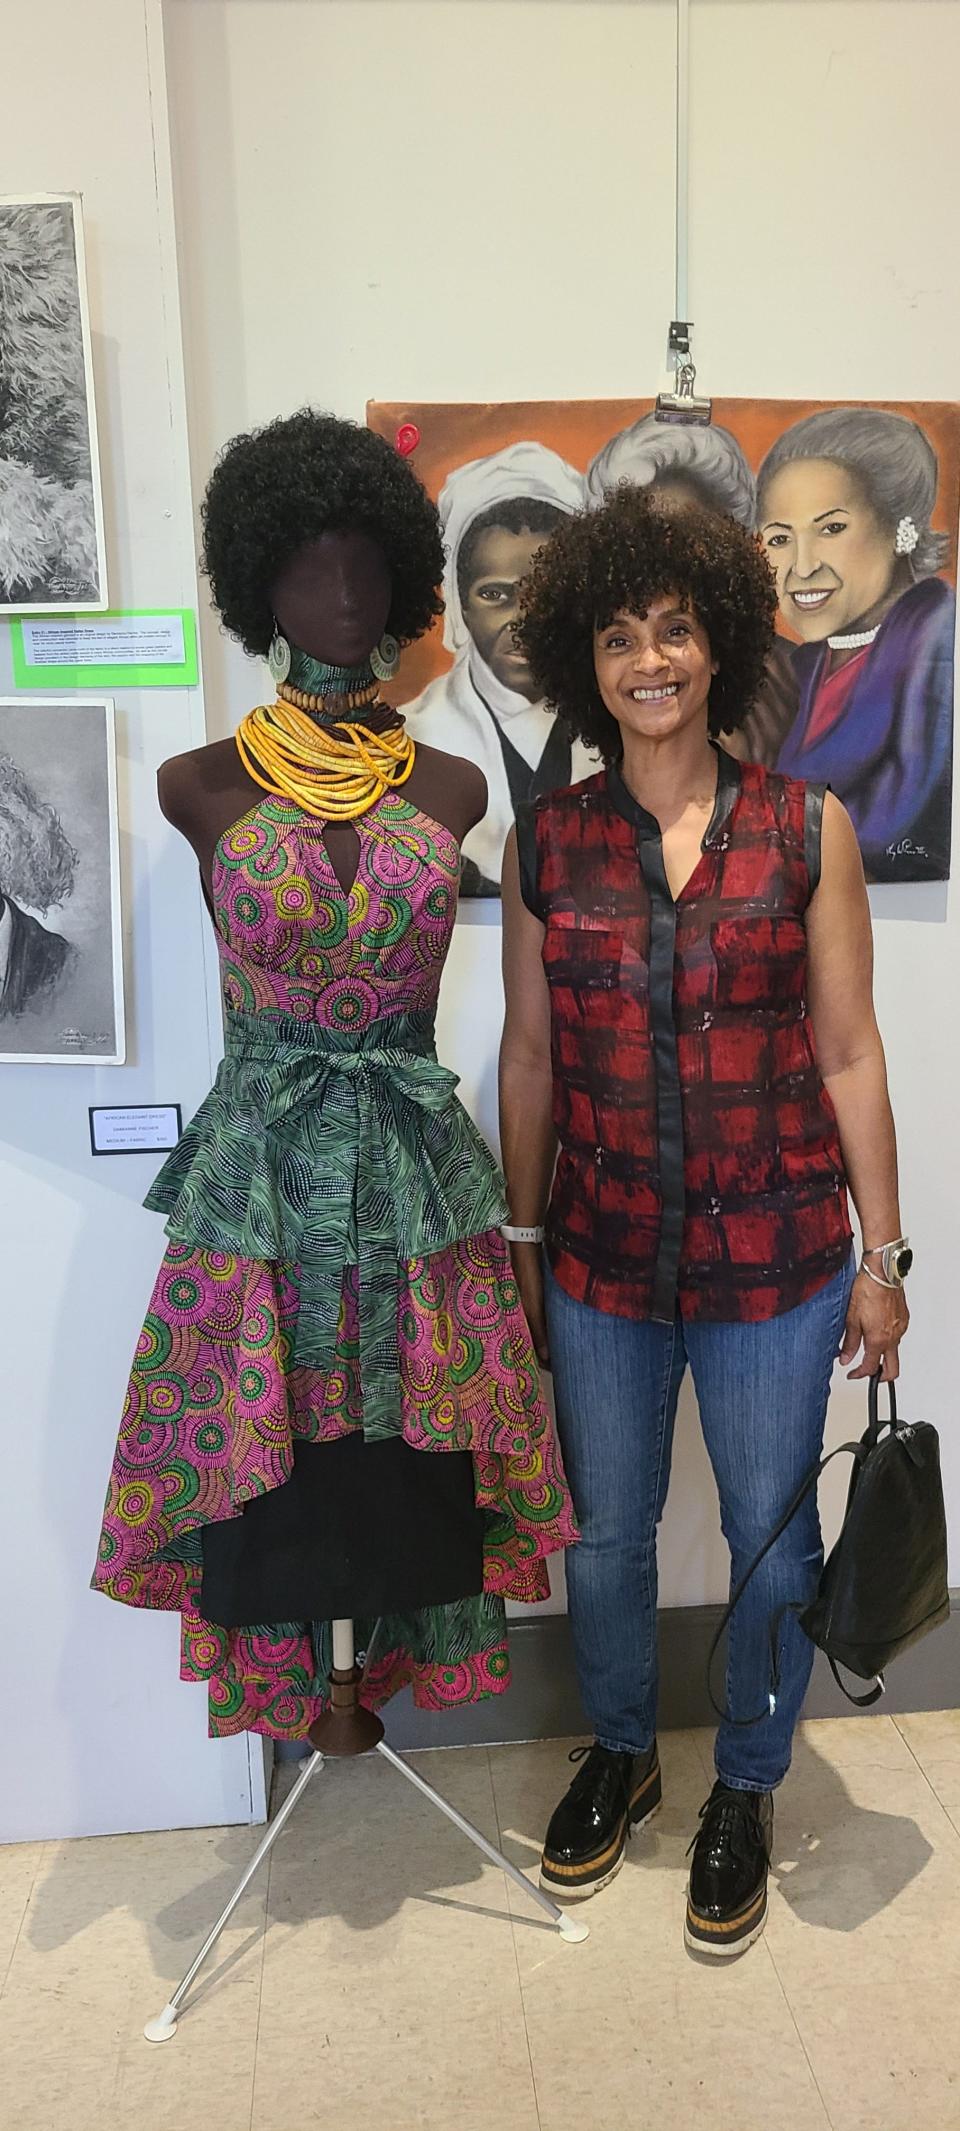 Damianne Fischer is seen here with her piece "African Elegant Dress". Fischer enjoys upcycling materials to make beautiful costumes.